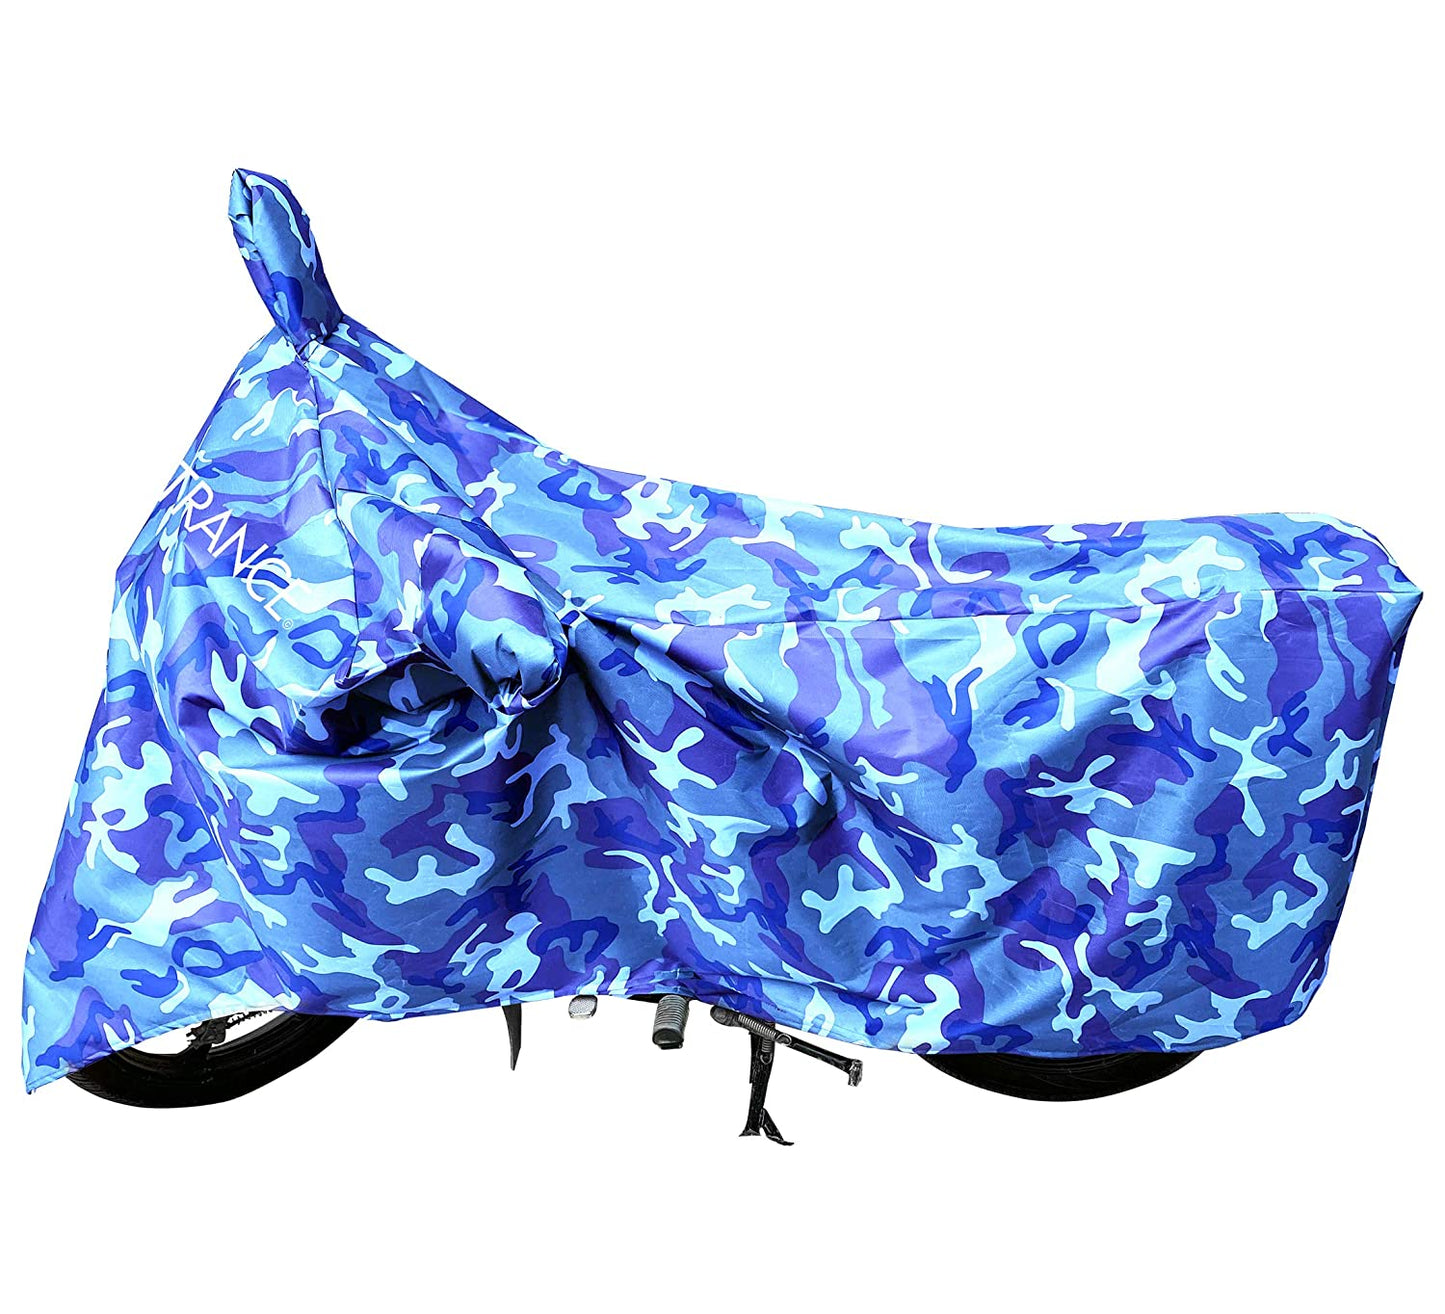 MotoTrance Jungle Bike Body Covers For Hero Passion X Pro - Interlock-Stitched Waterproof and Heat Resistant with Mirror Pockets